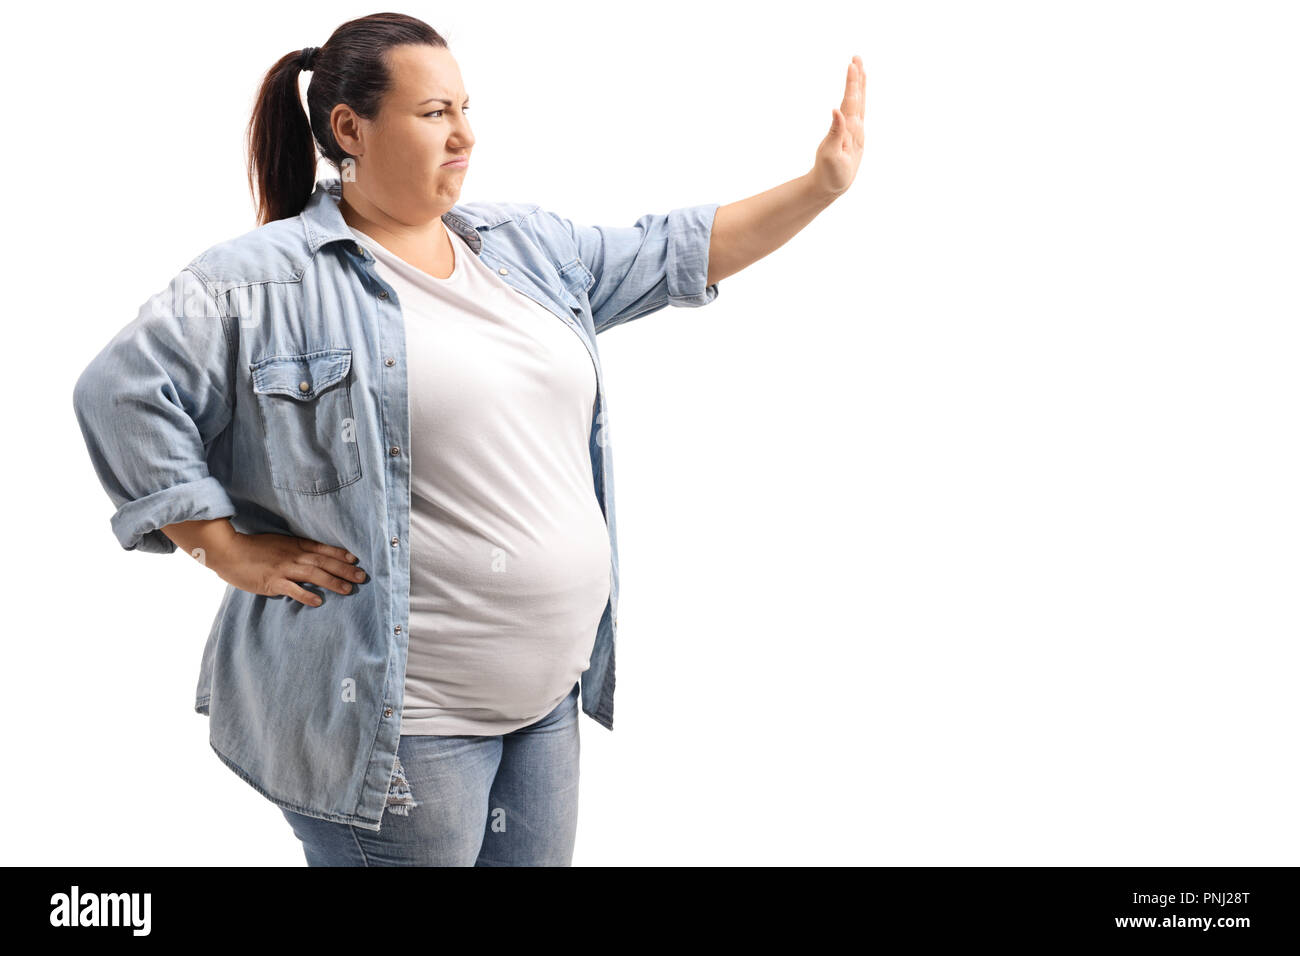 Overweight woman gesturing stop isolated on white background Stock Photo